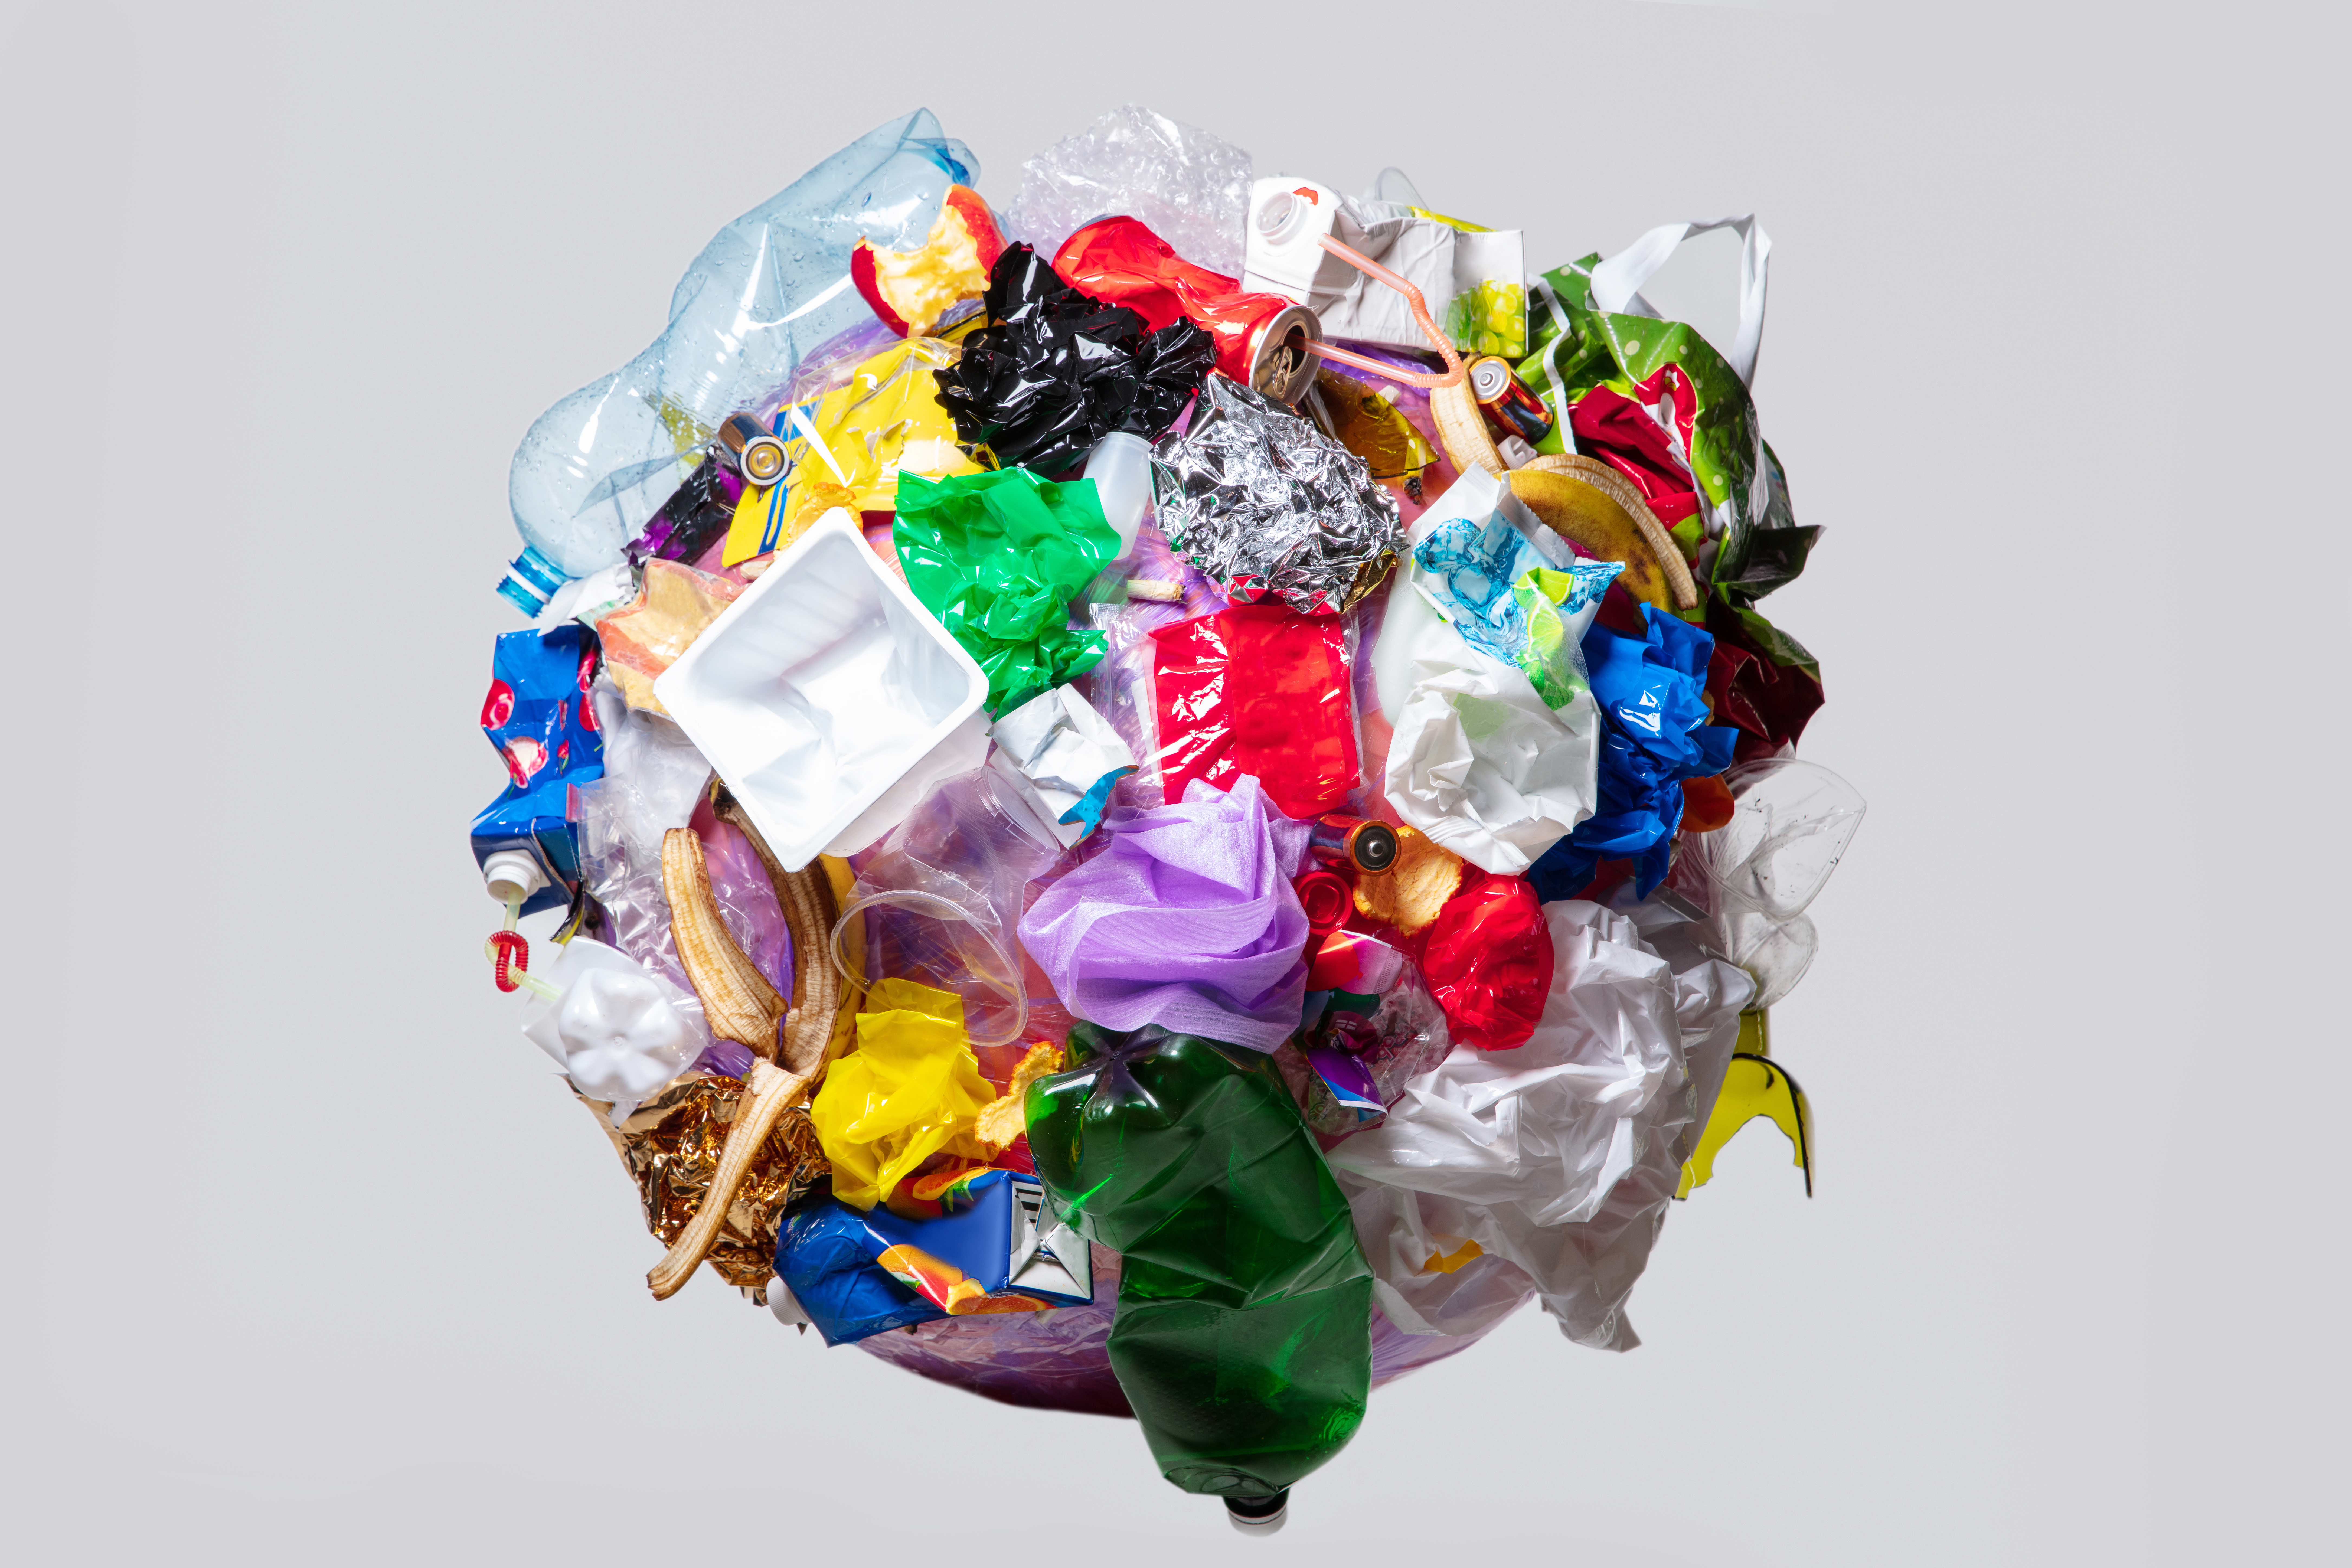 Protect your family from toxic plastics. A sphere of crushed plastics in the shape of the earth.